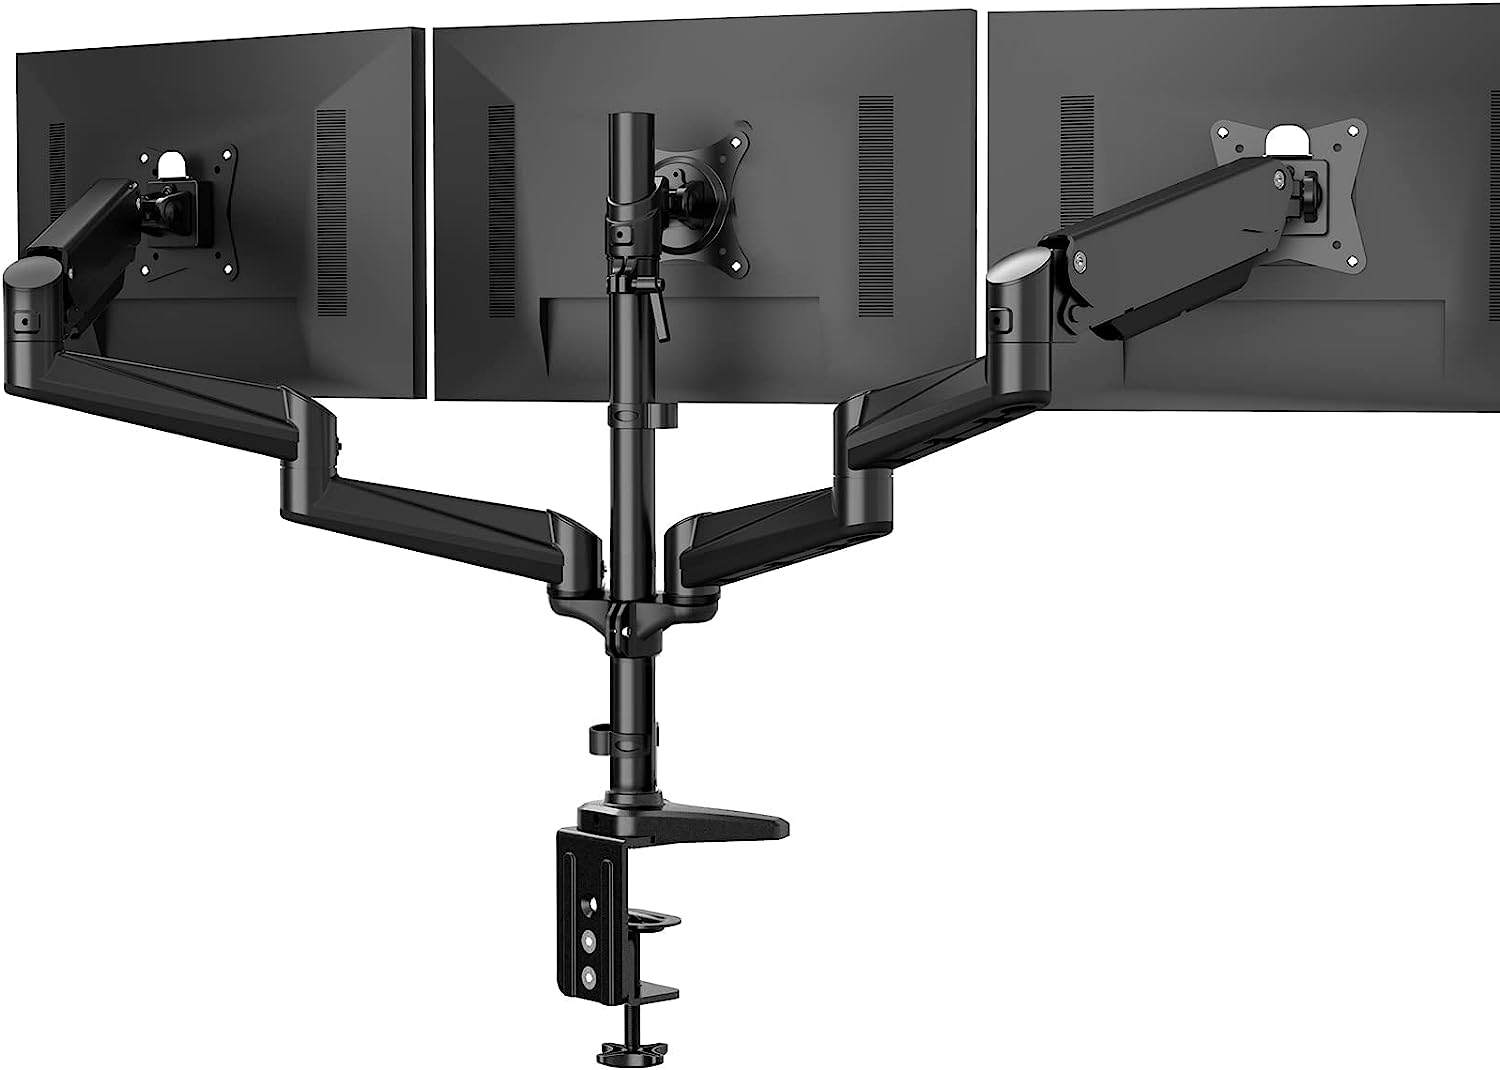 HUANUO Triple Monitor Stand - 3 Monitor Mount with Gas [...]